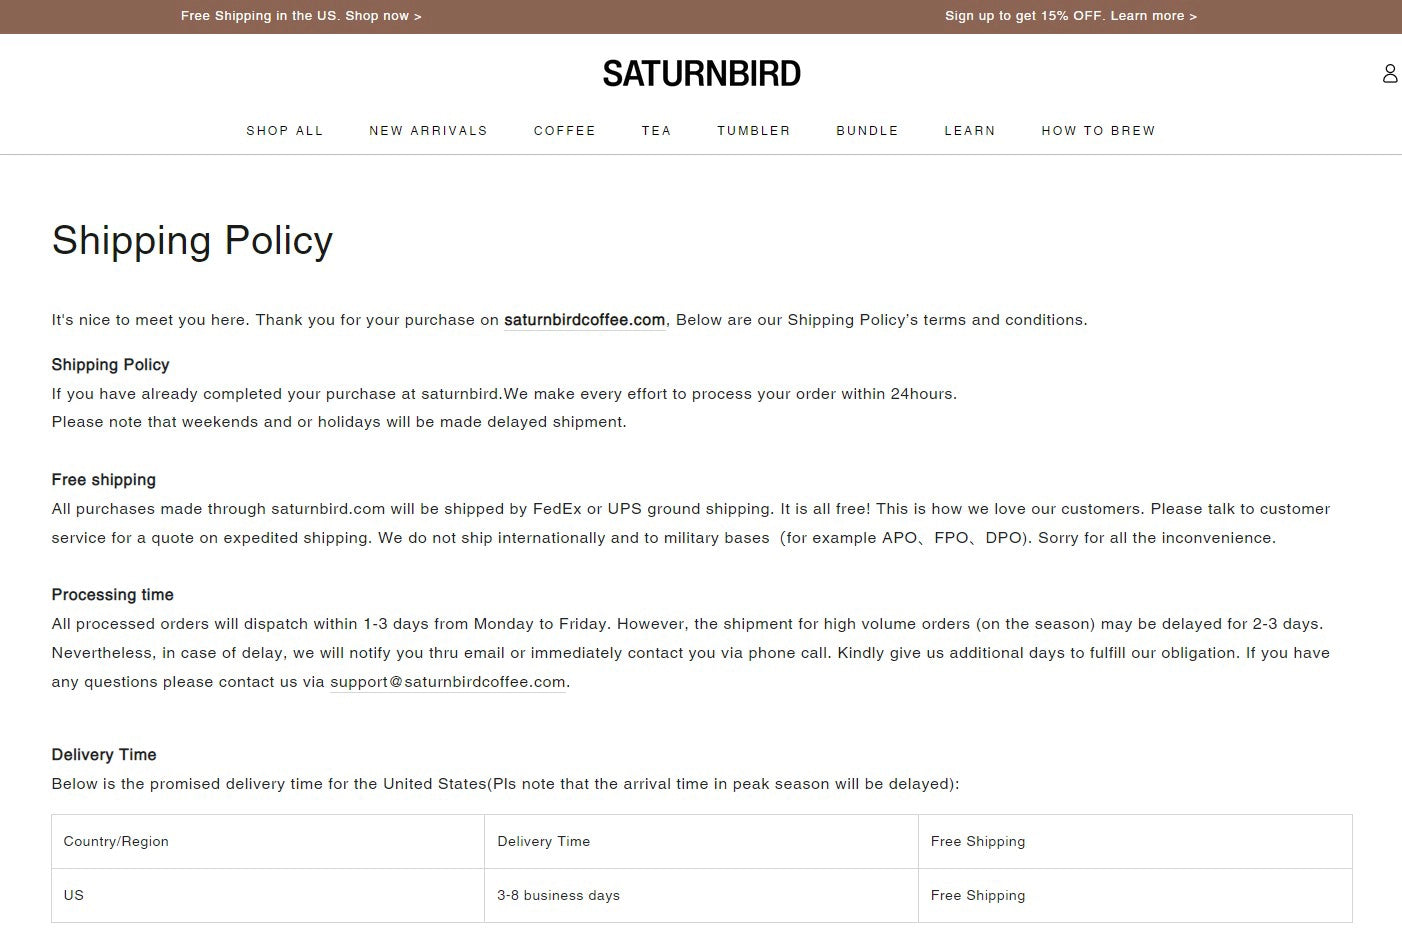 Saturnbird’s Shipping Policy page